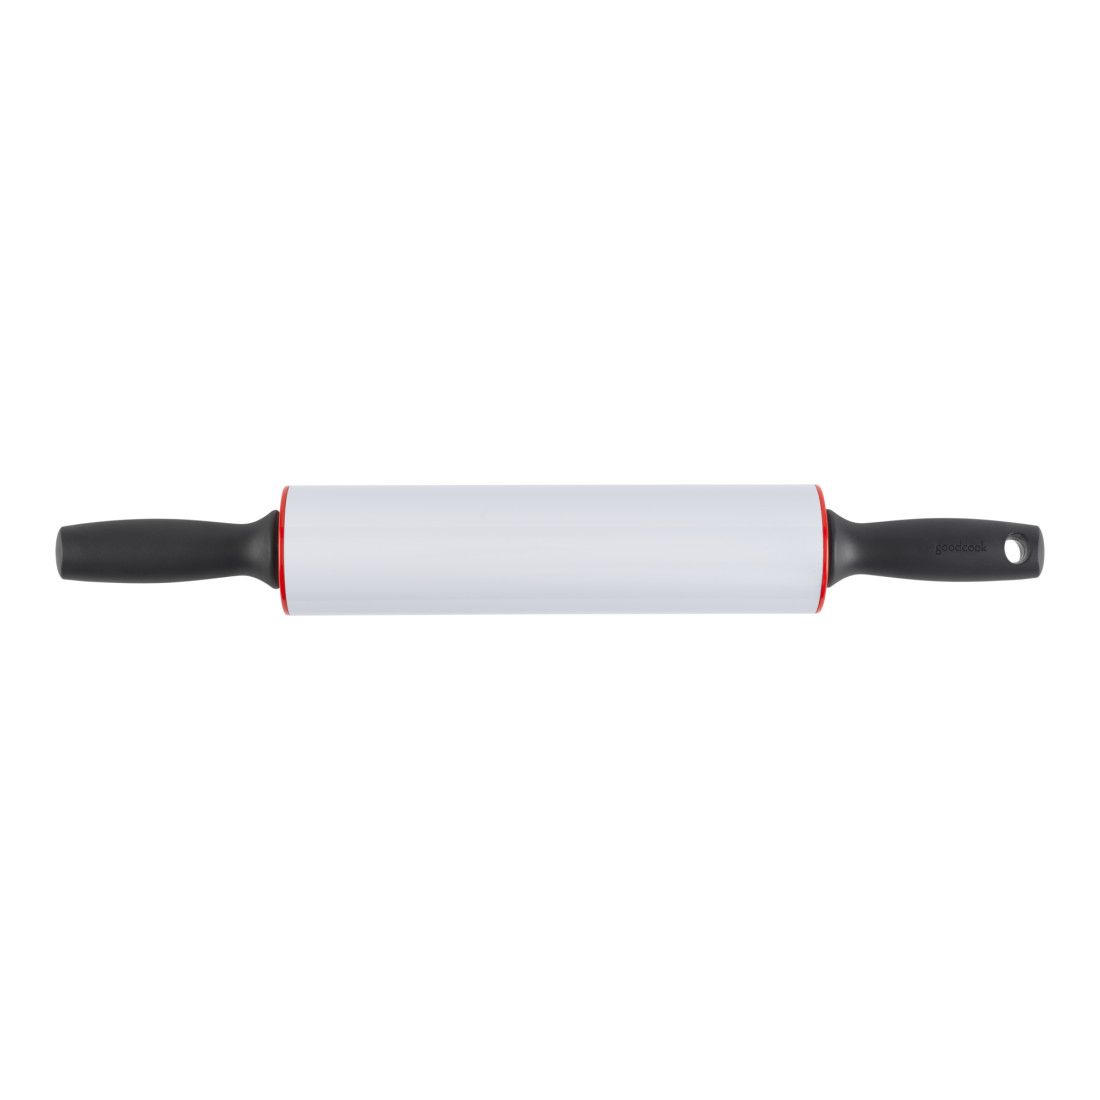 OXO Good Grips Nonstick Weighted Ergonomic Rolling Pin